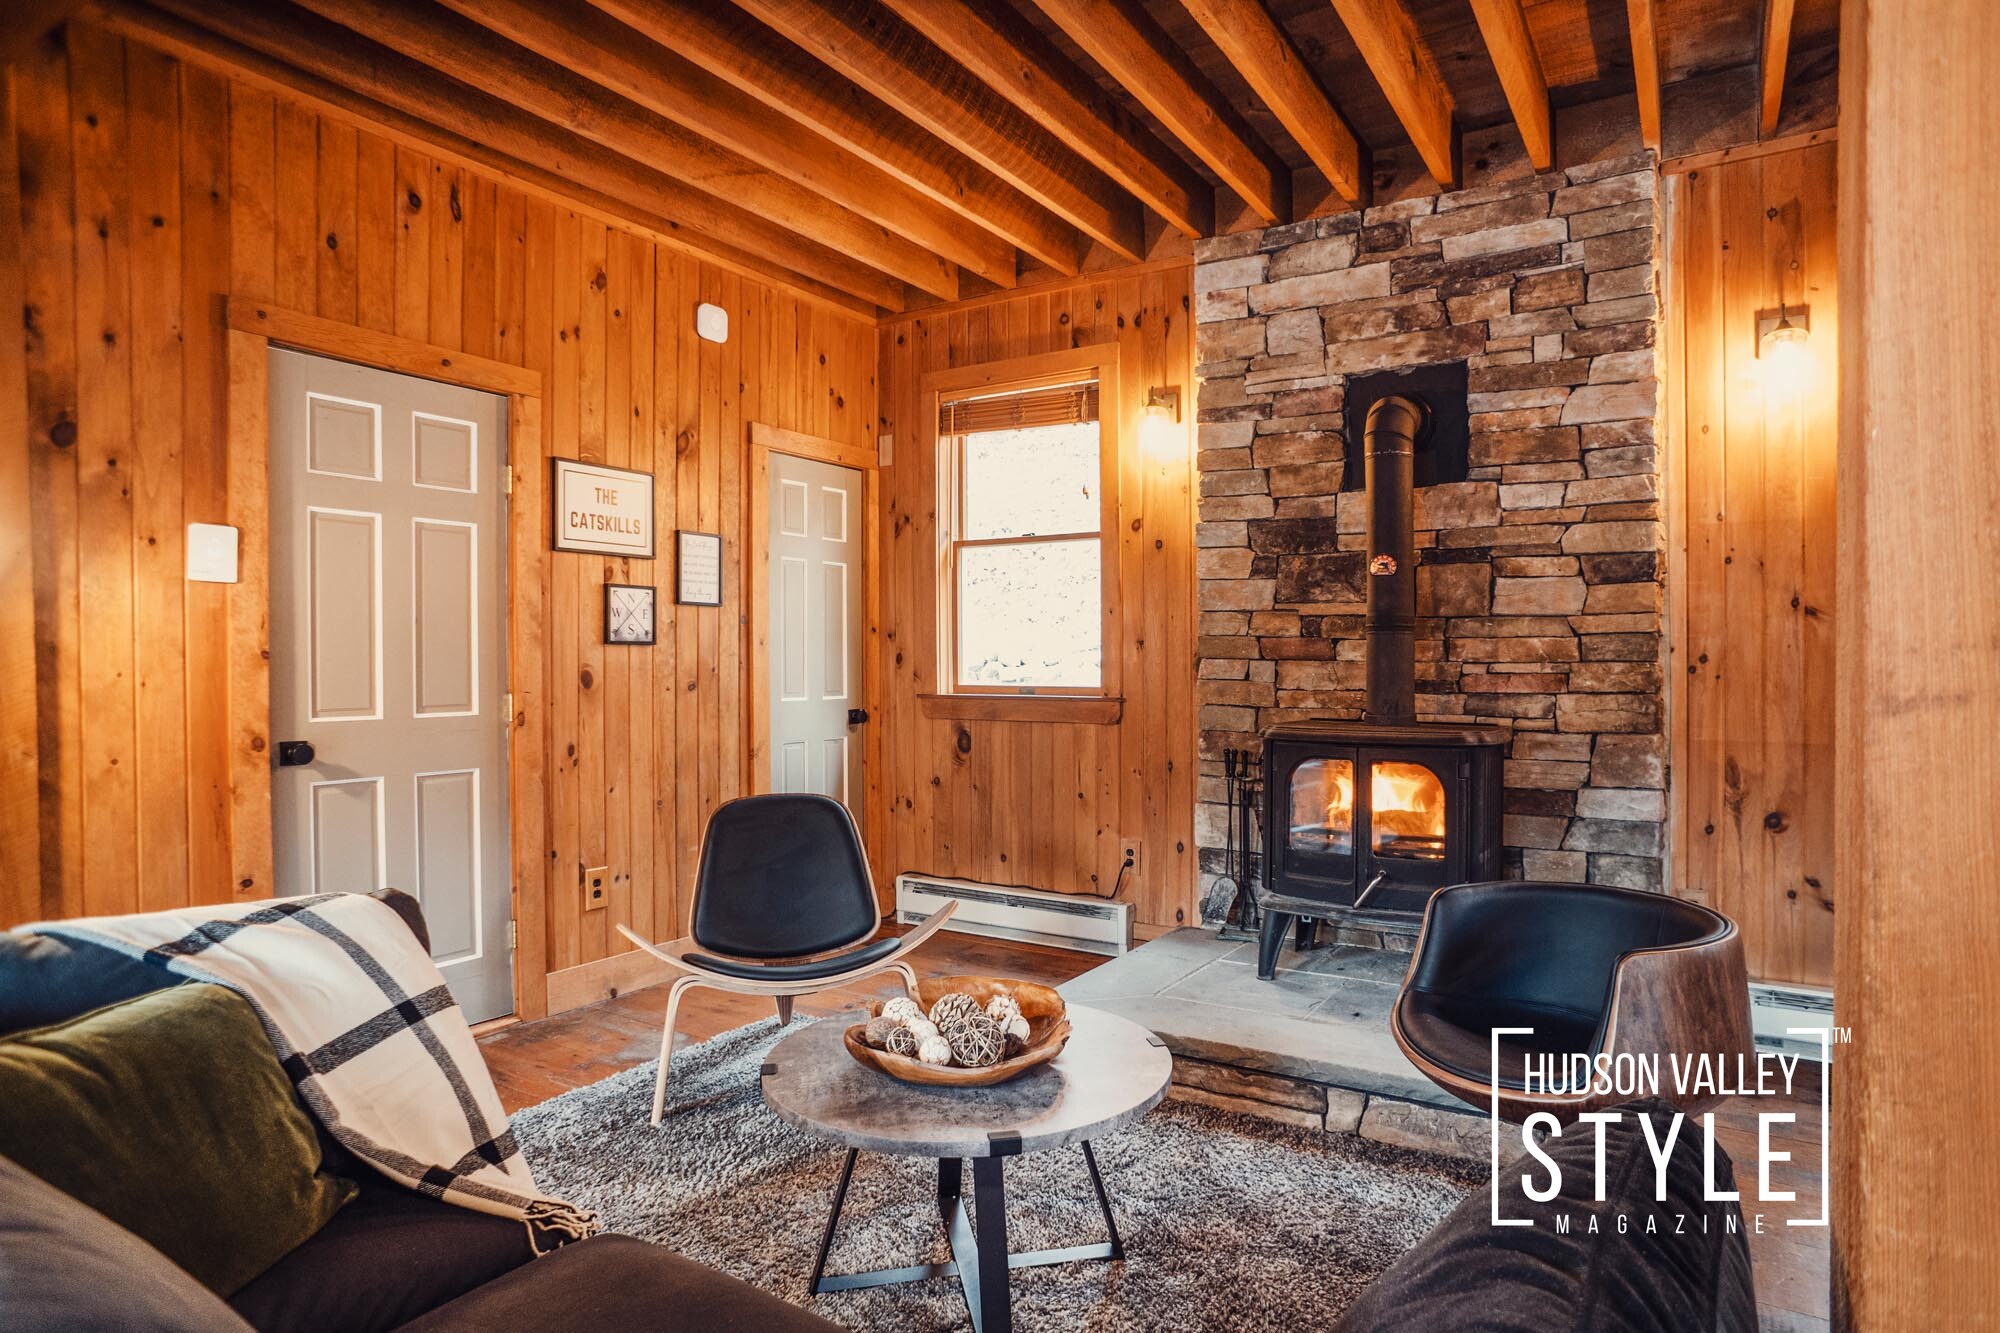 Discover the Hawks Nest Cabin in Port Jarvis, NY - New Airbnb Experience in the Catskill Mountains - Airbnb Photography by Maxwell Alexander - Alluvion Media